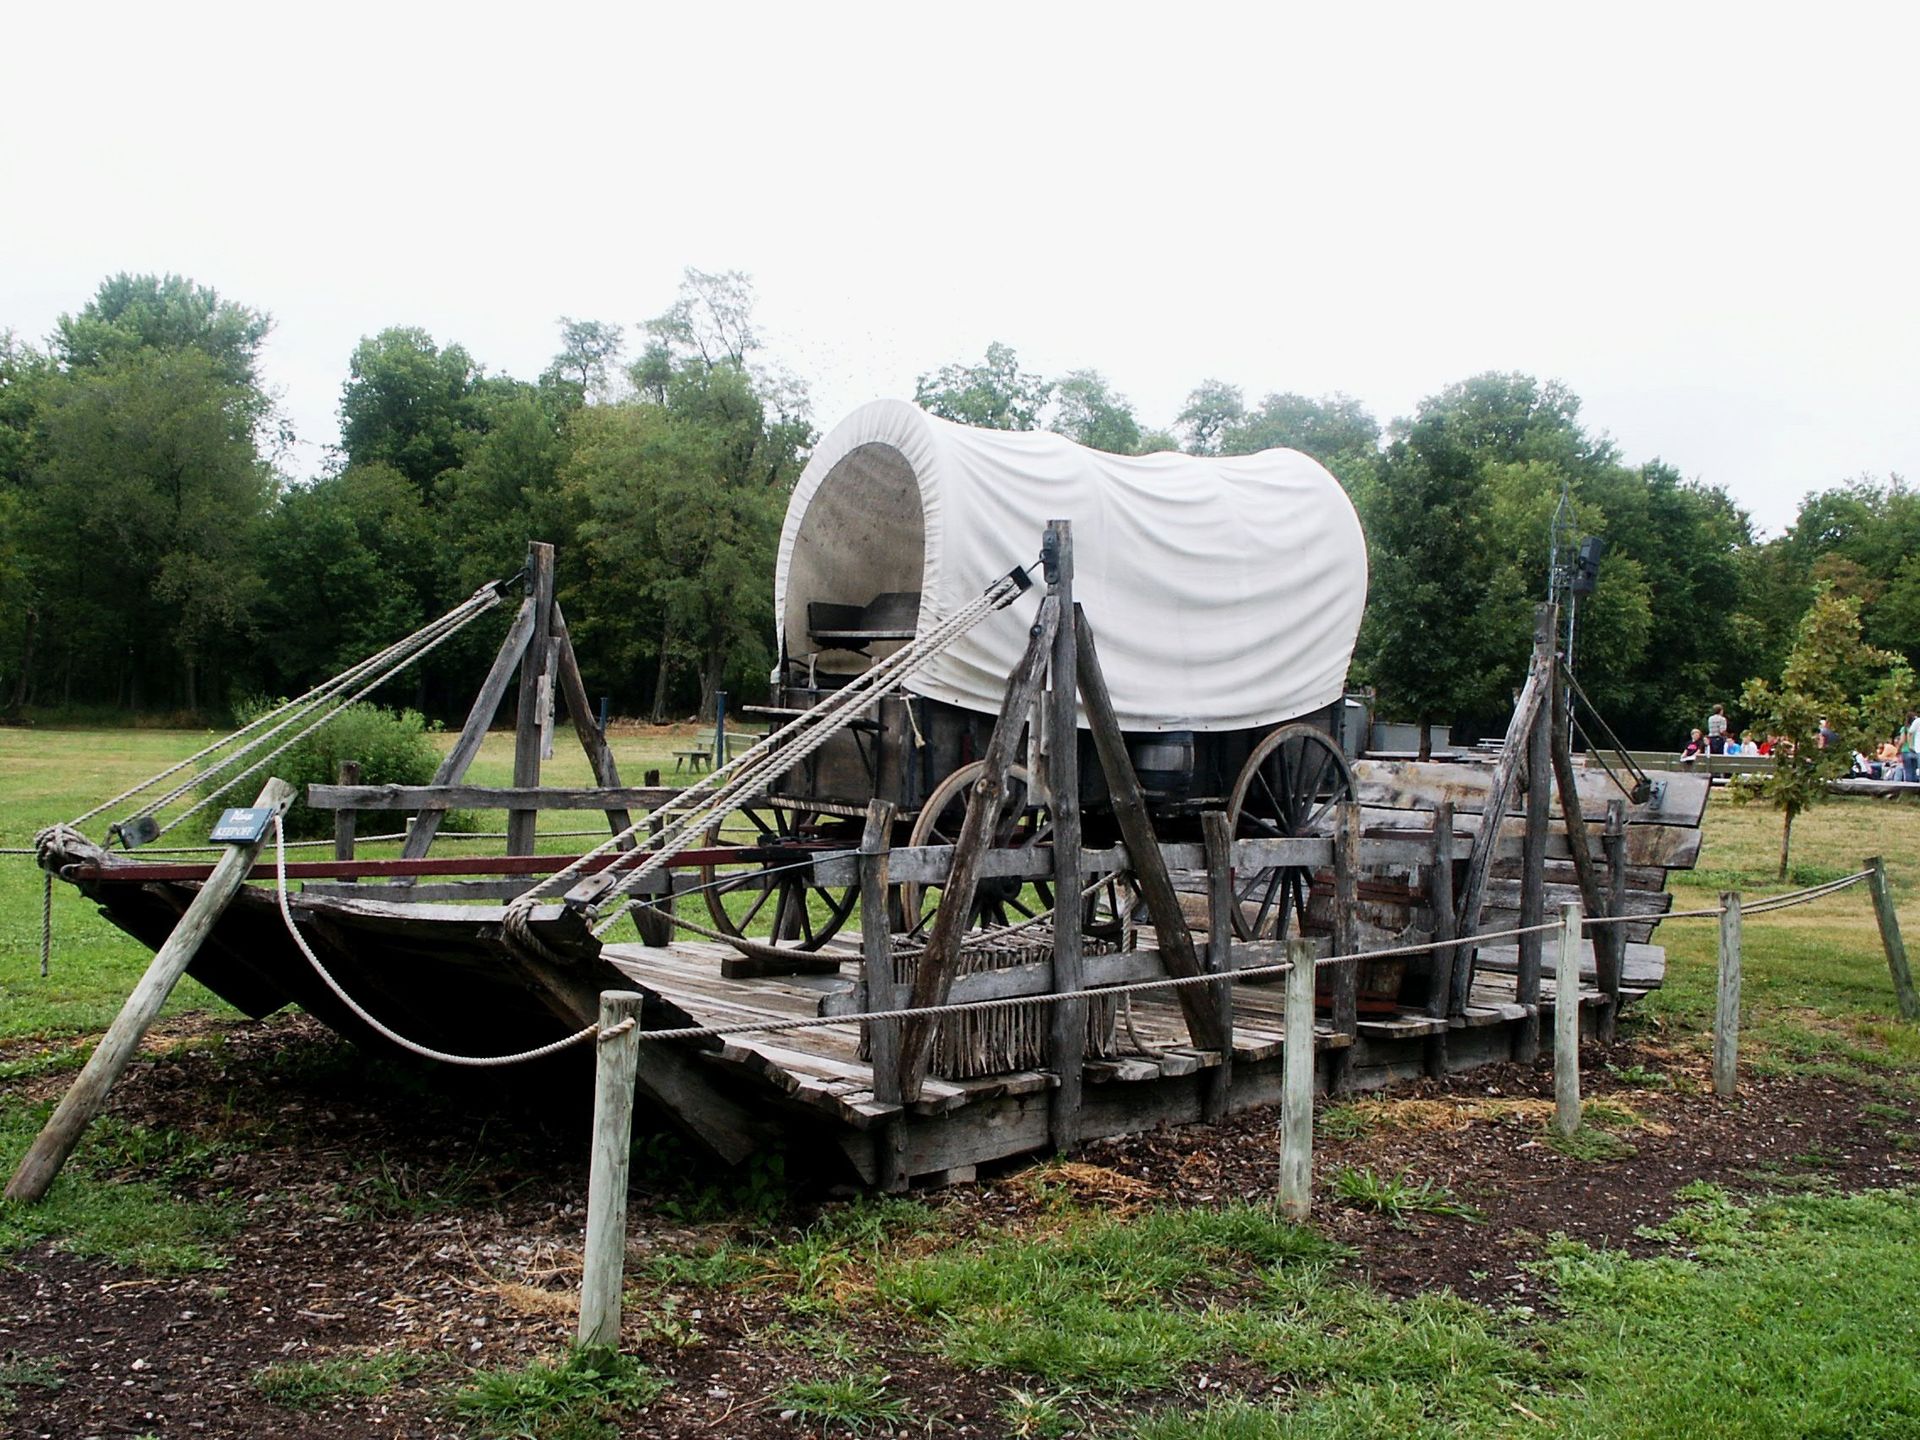 A display of the wagon ferry in Nauvoo, Illinois.